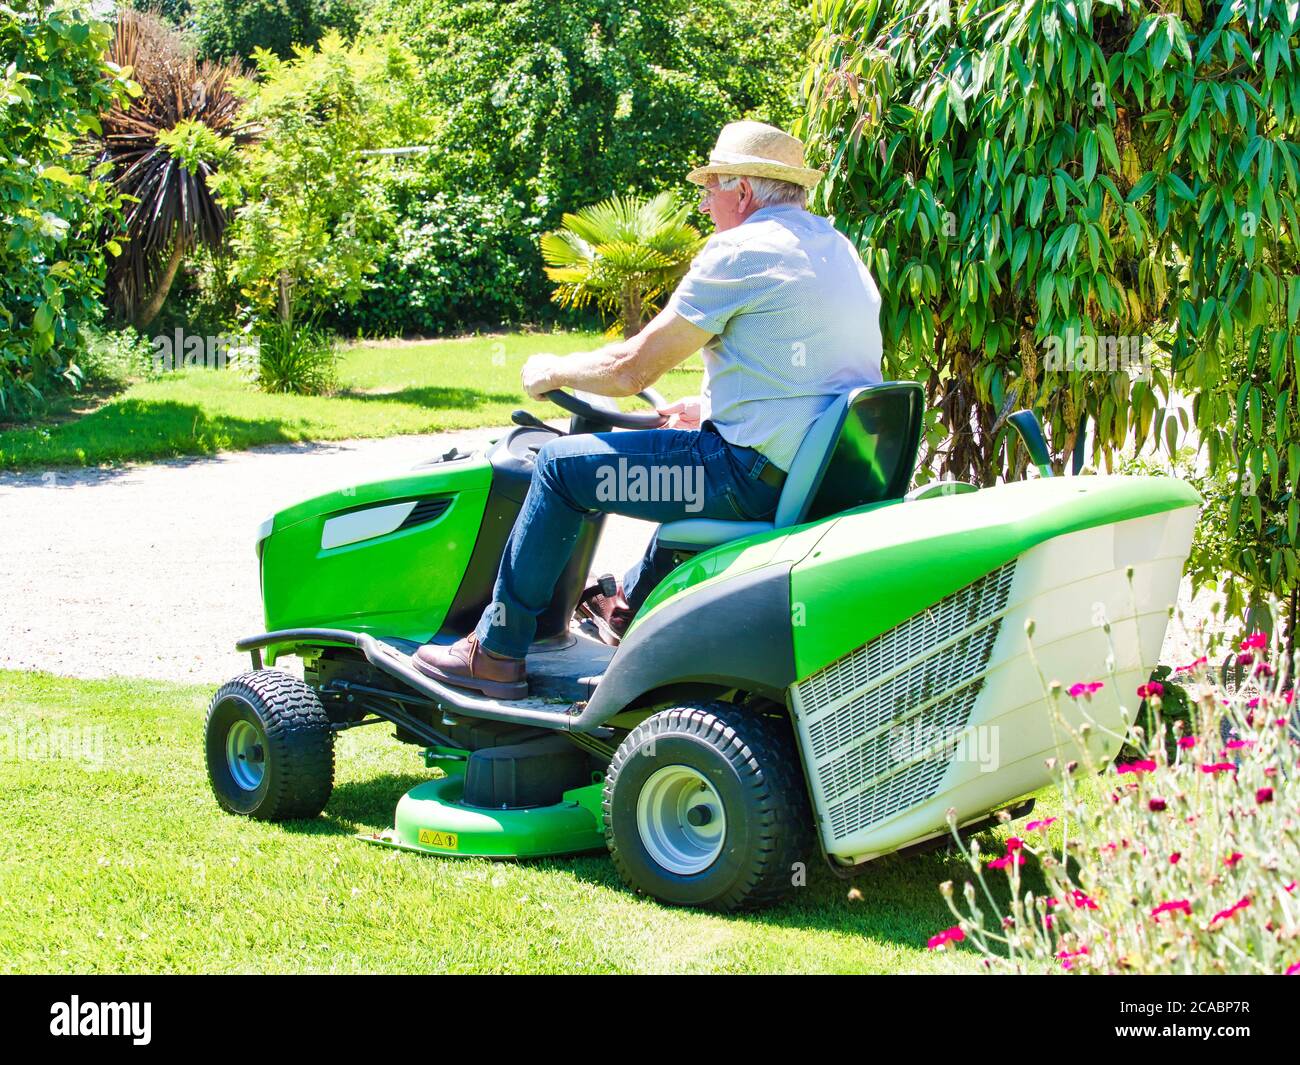 Senior man 75 old years driving a tractor lawn mower in garden with flowers. Green and white ride on mower, turning in field between colorful flowers Stock Photo